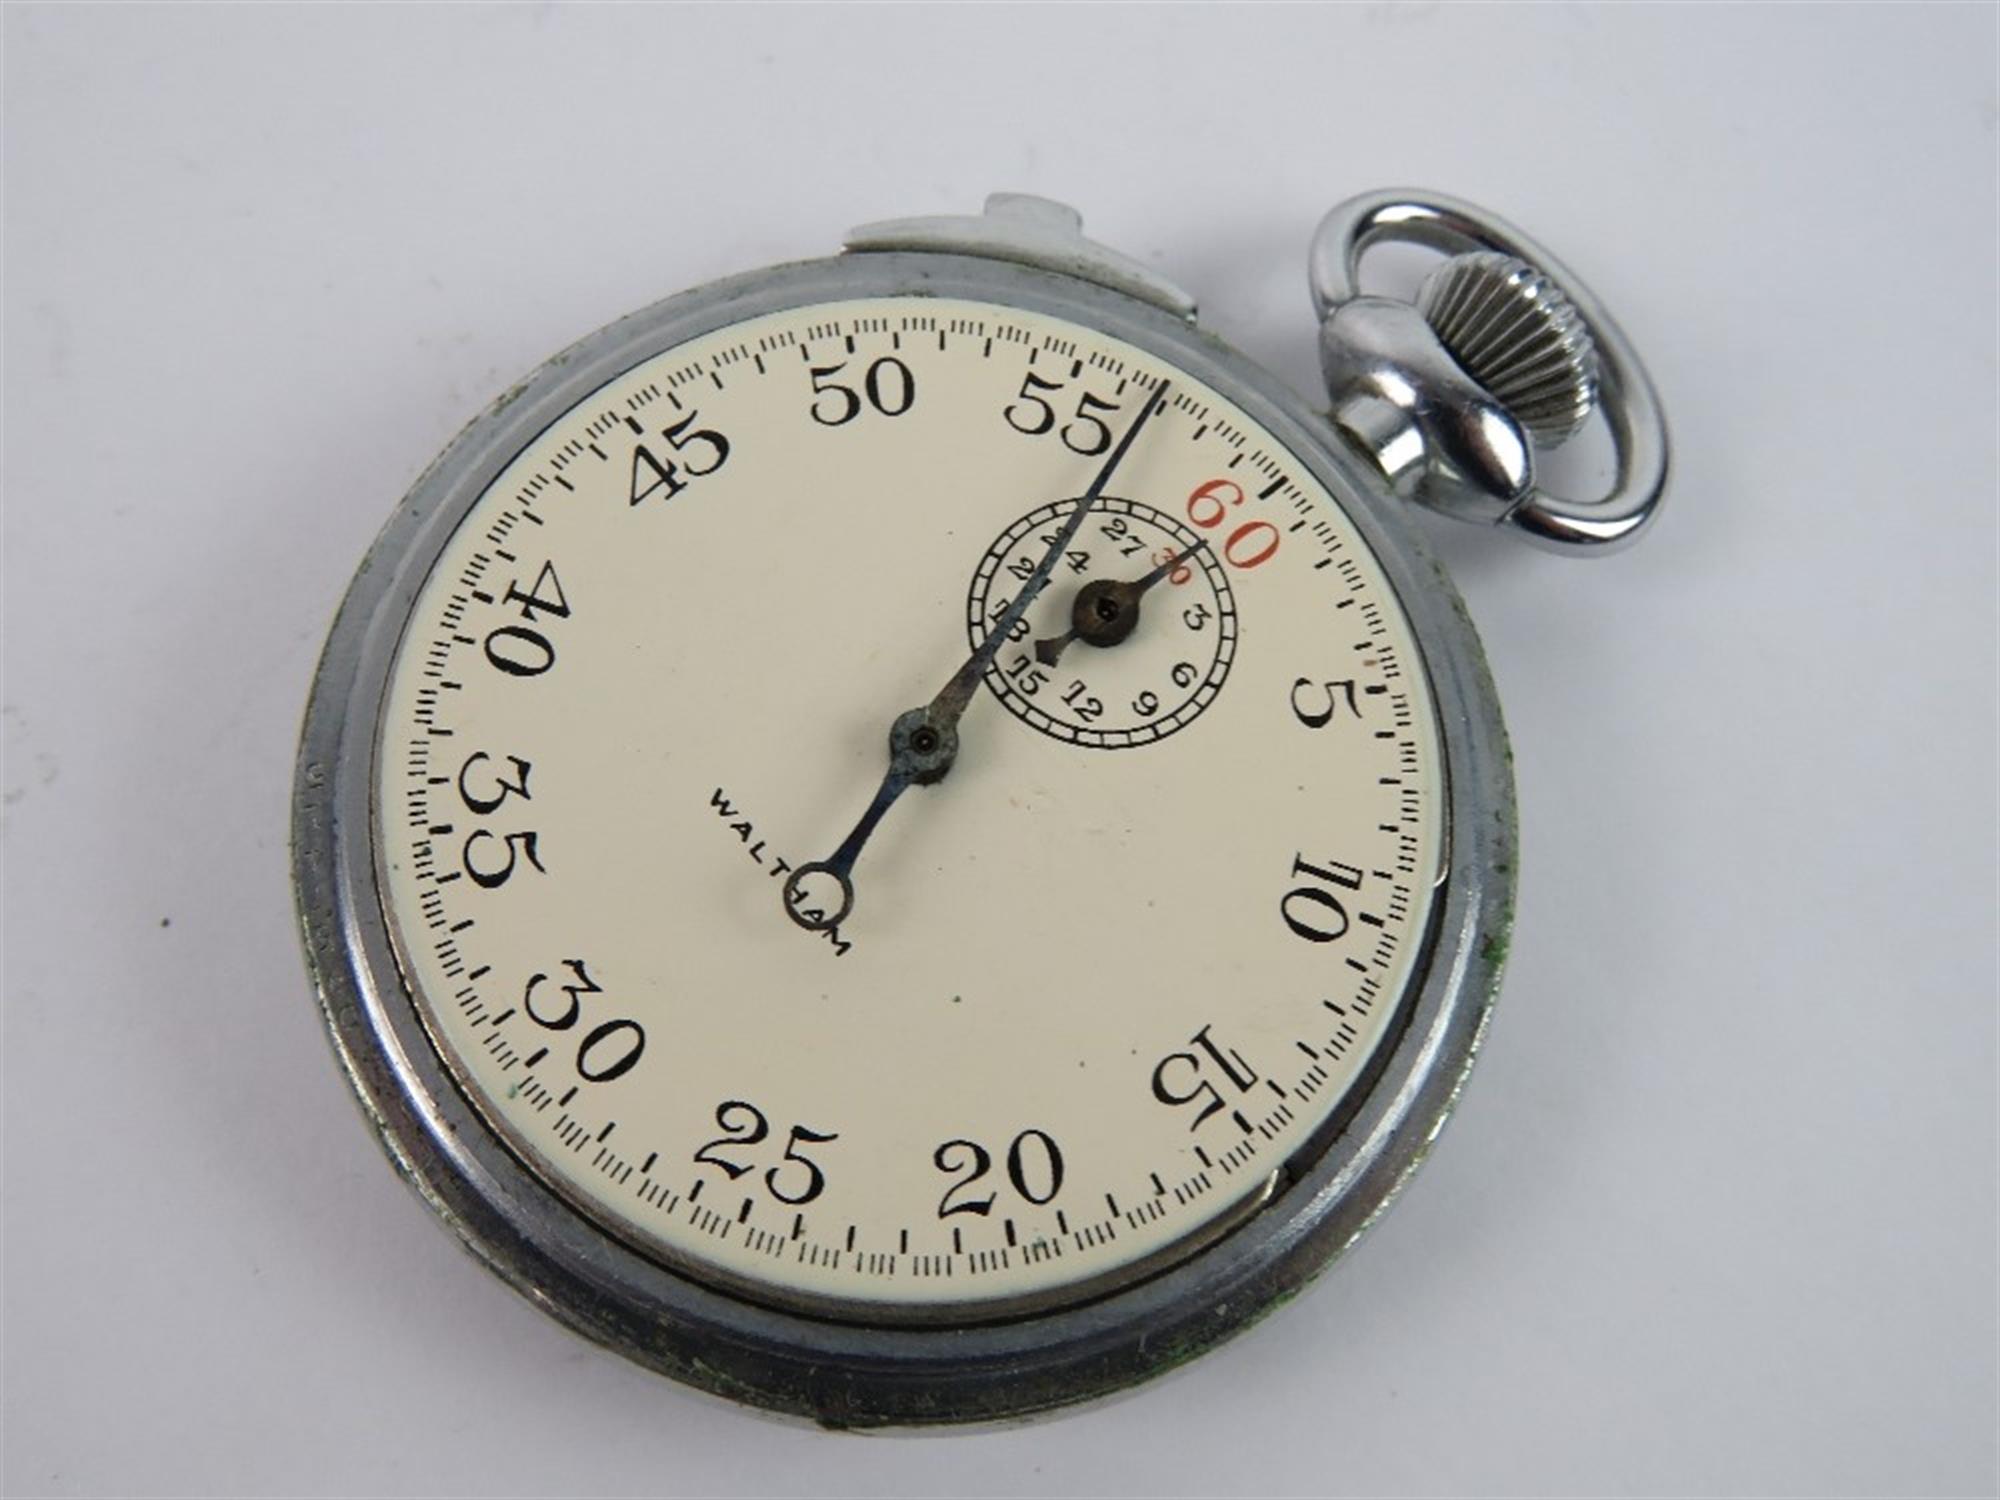 A WWII Military Pocket Watch and Waltham Military Stopwatch - Image 7 of 8